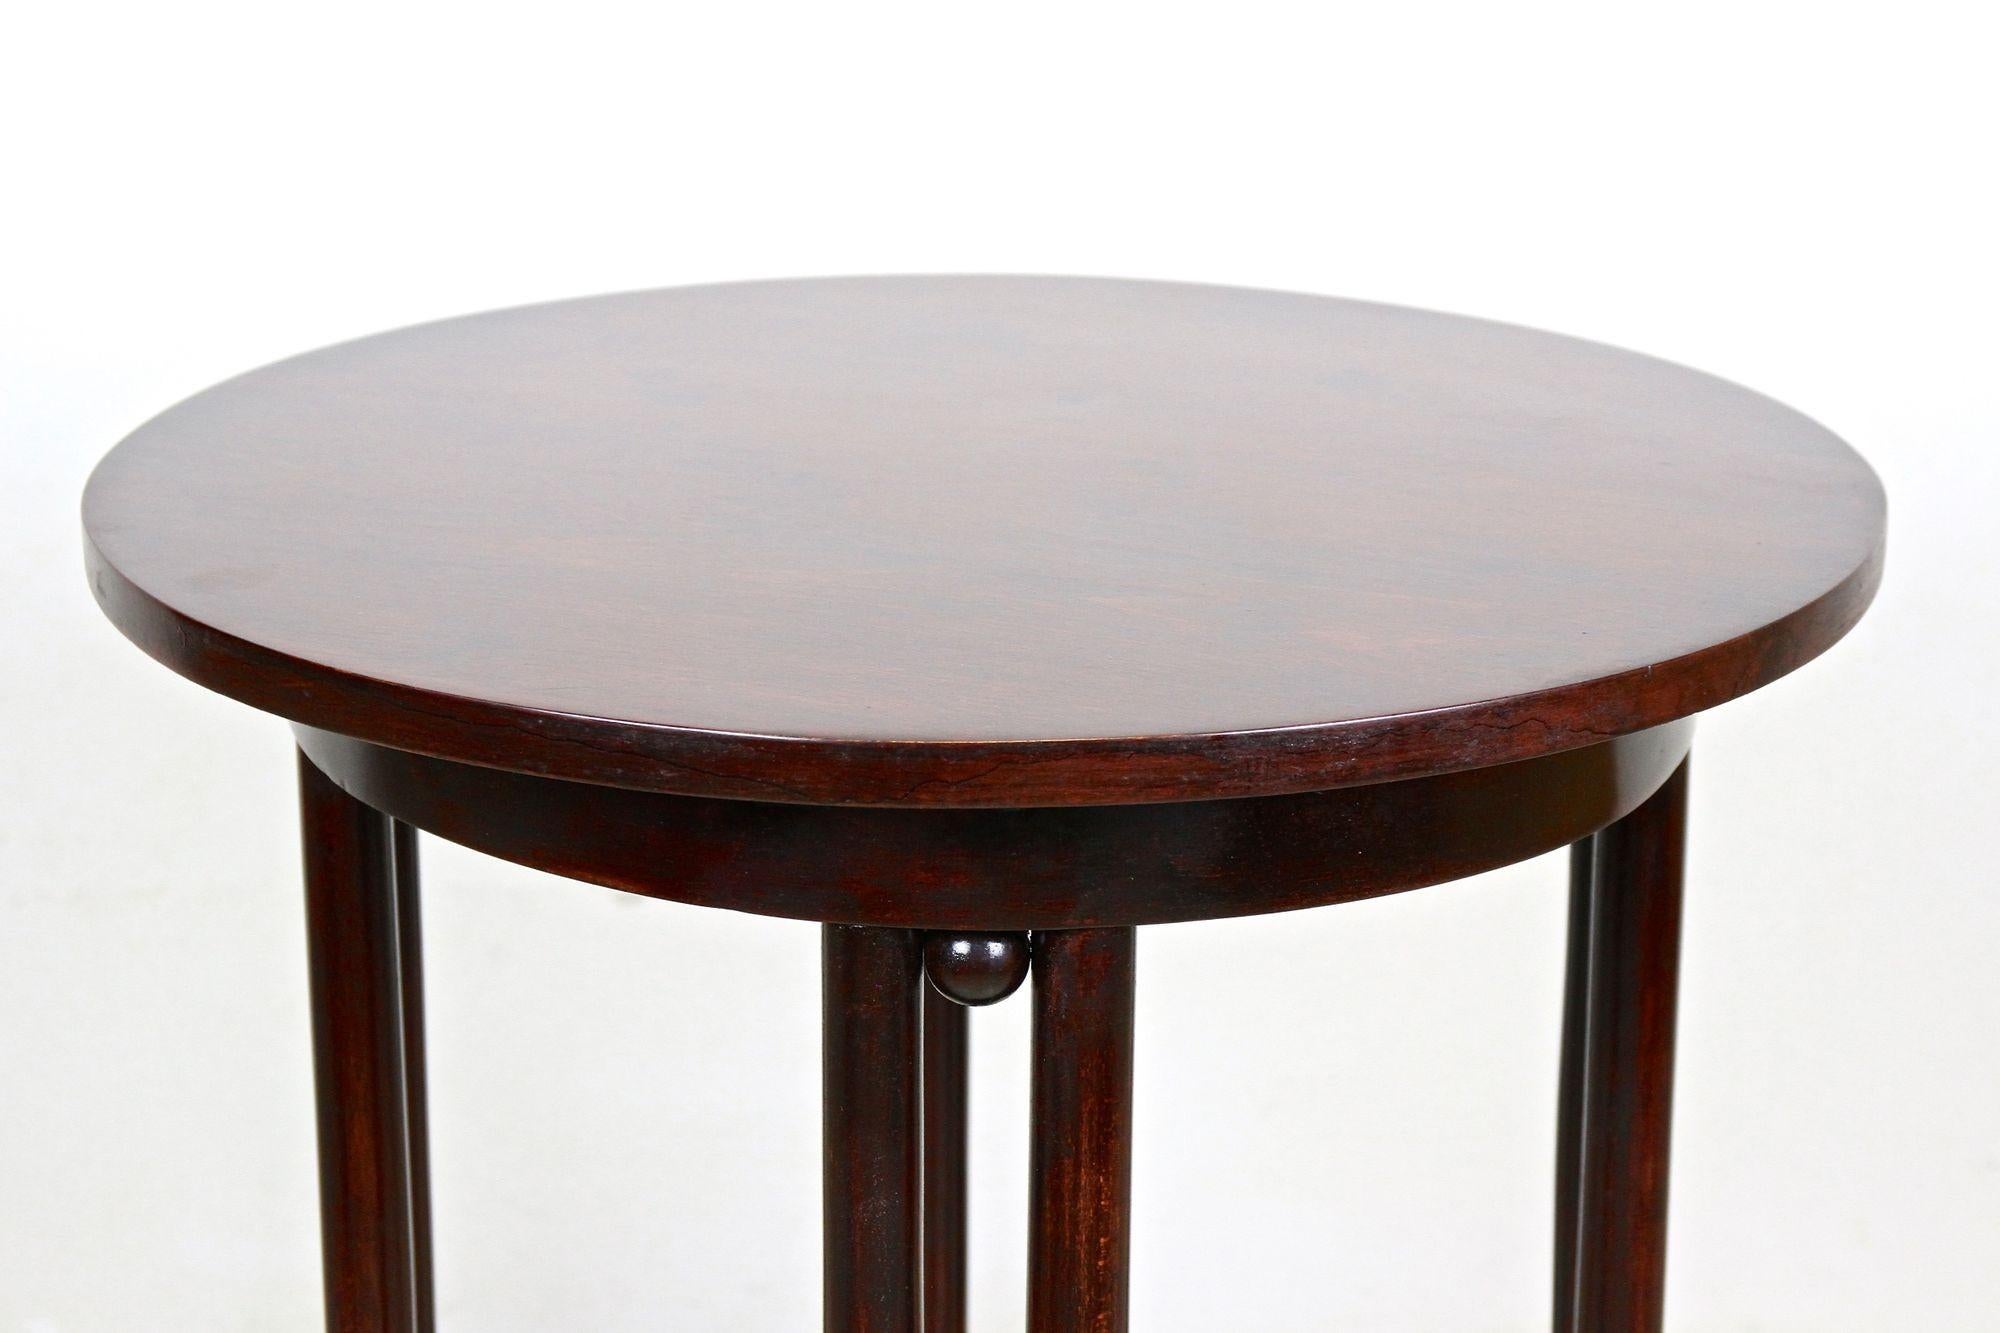 Polished Thonet Bentwood Side Table, Design by Josef Hoffmann, Austria ca. 1906 For Sale